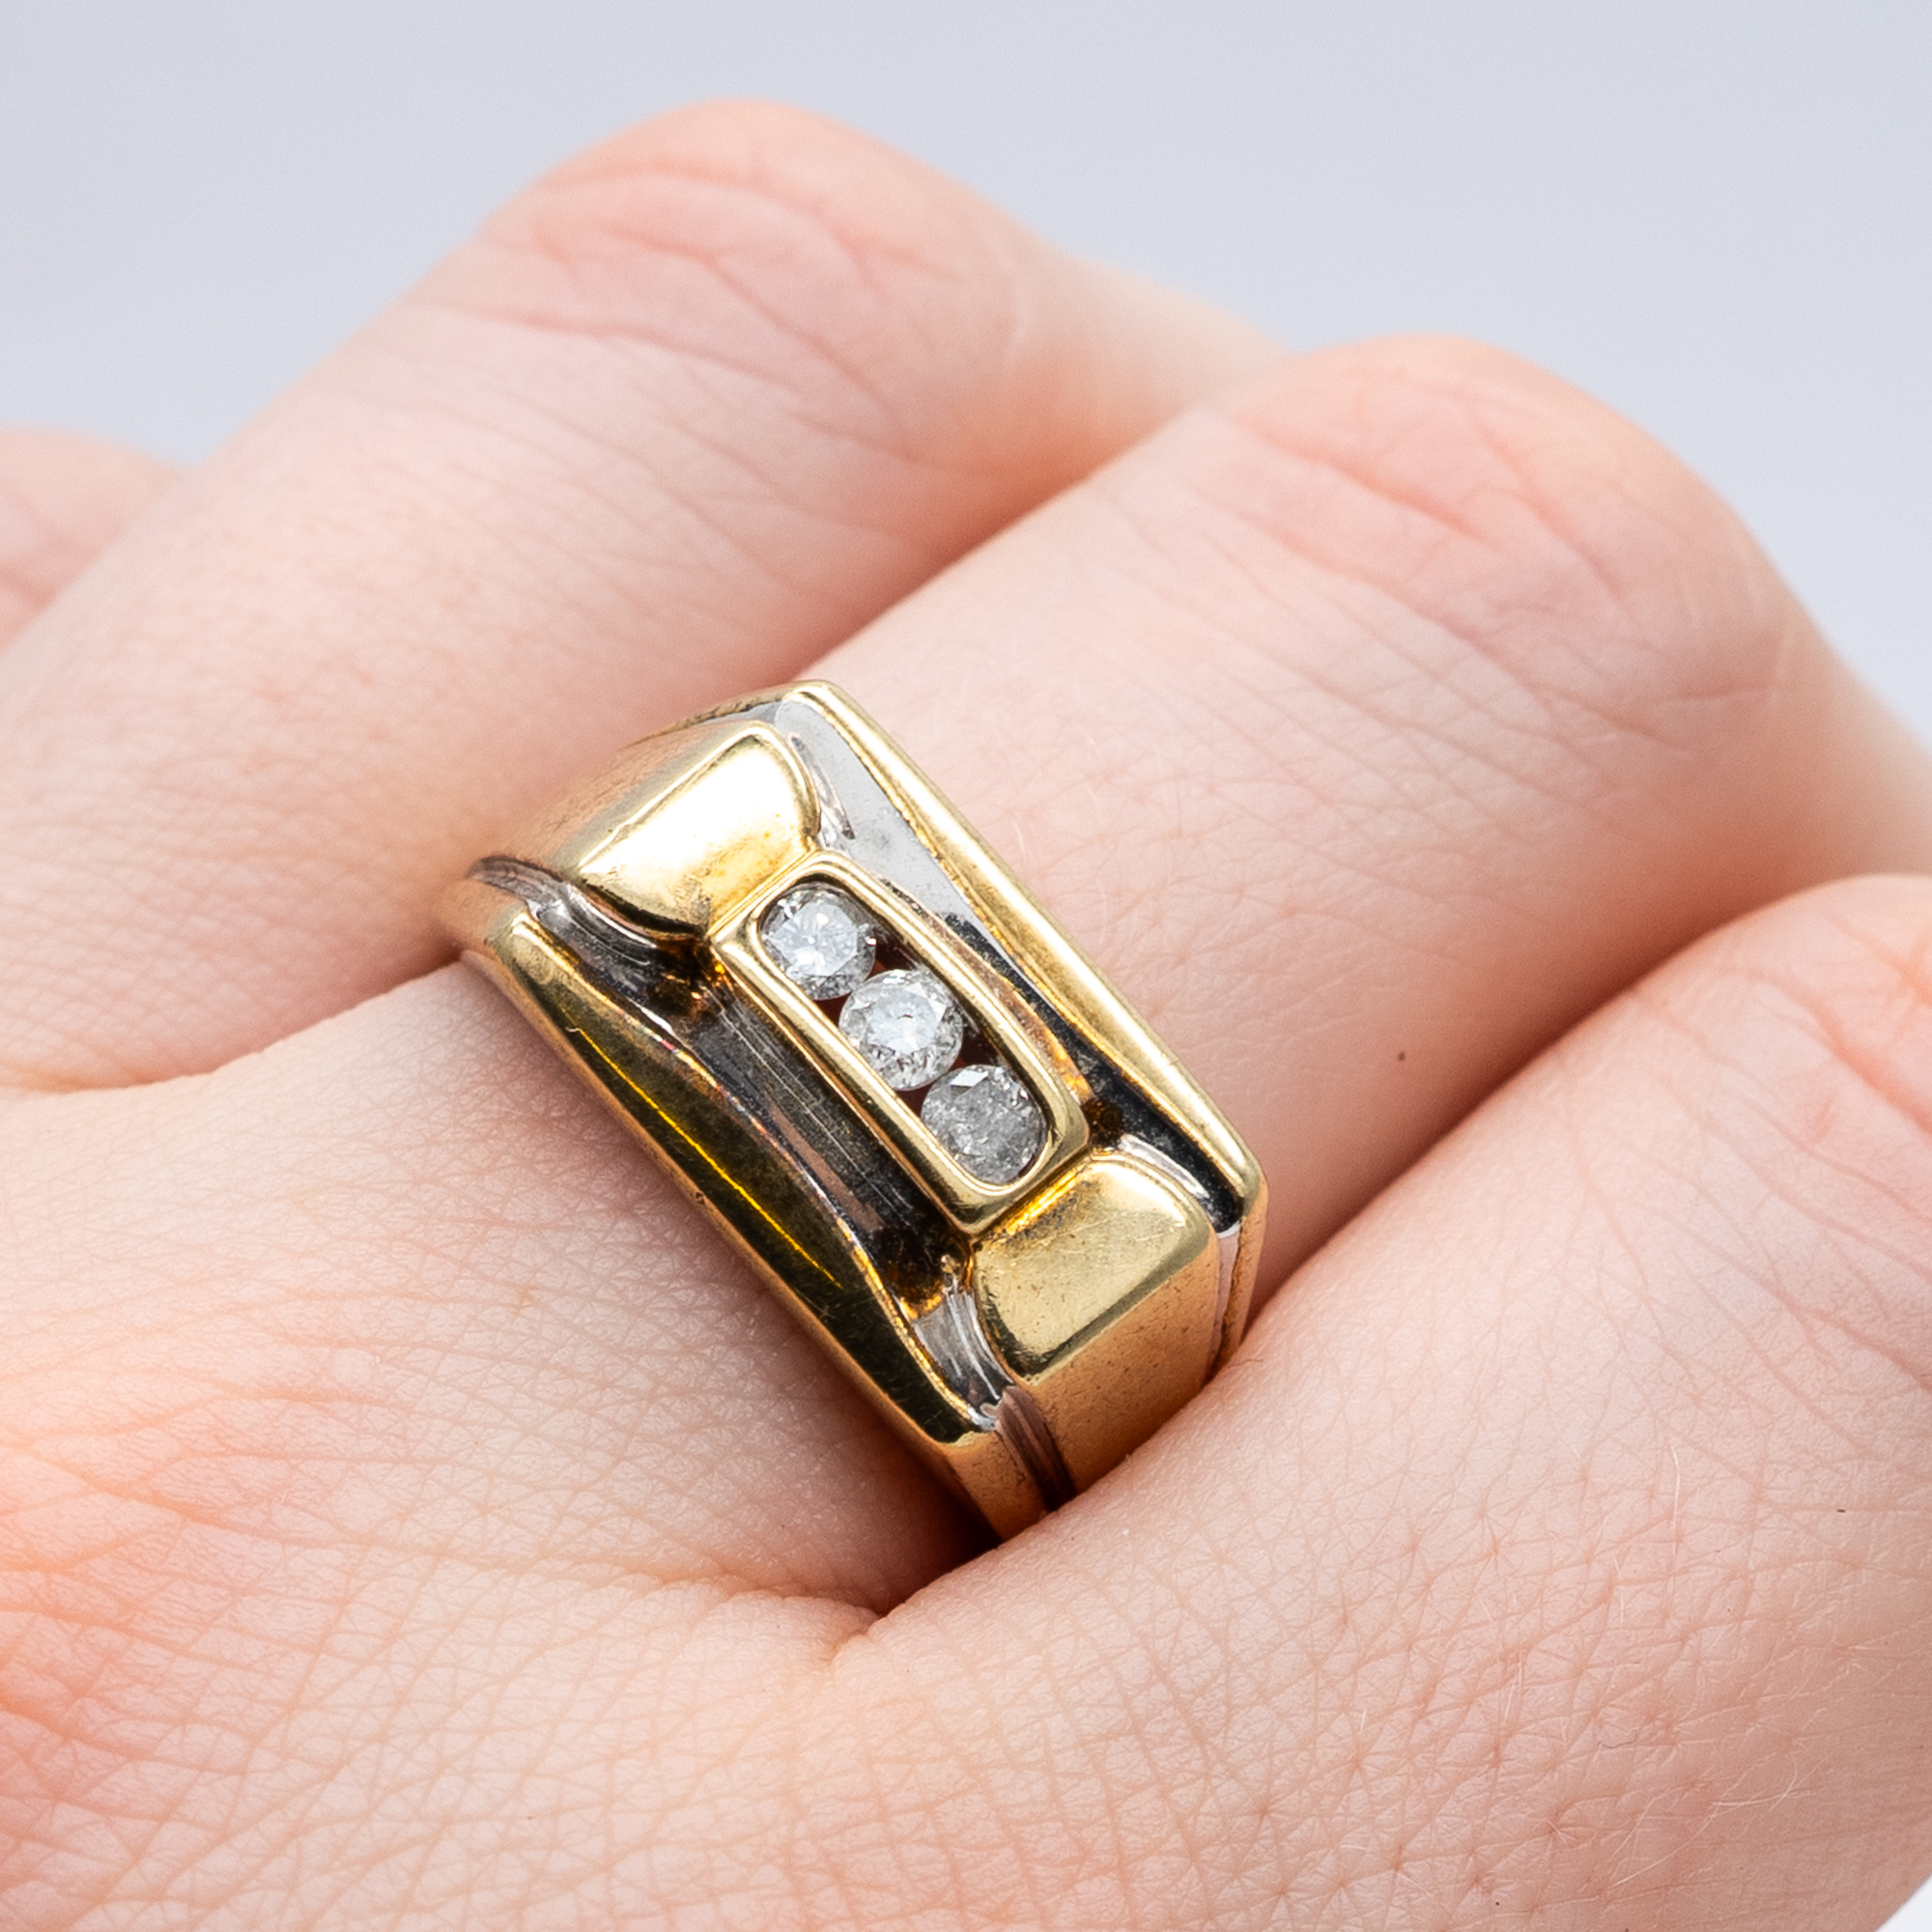 A 9ct yellow gold diamond signet ring - Image 5 of 5